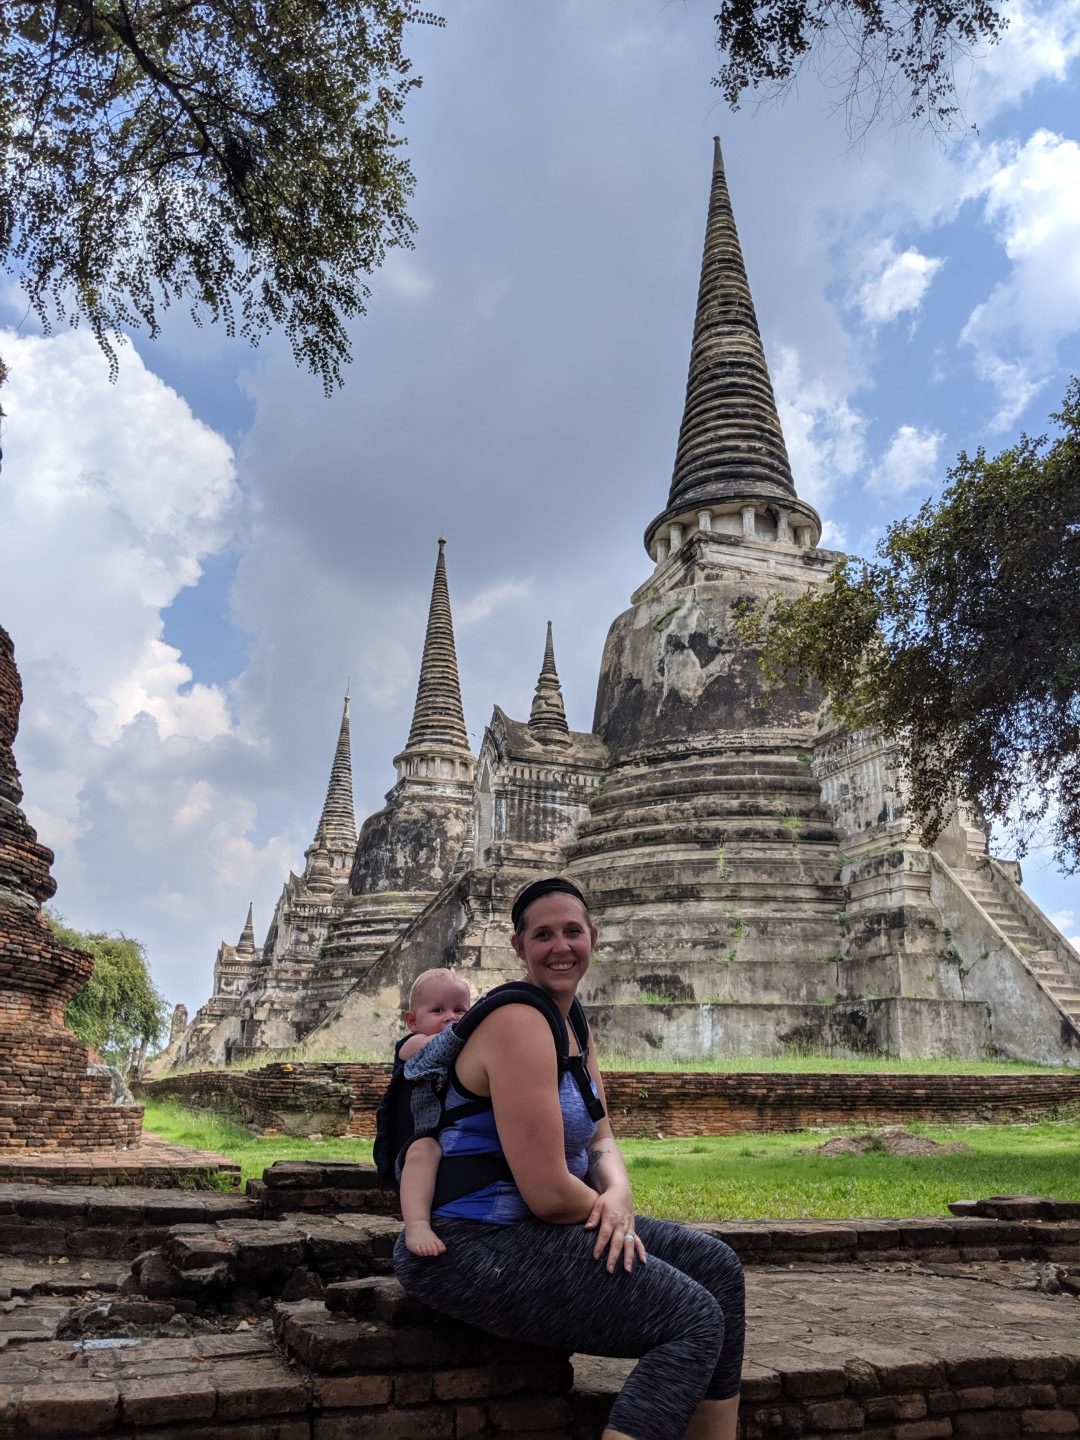 Should you have a stroller in Thailand?